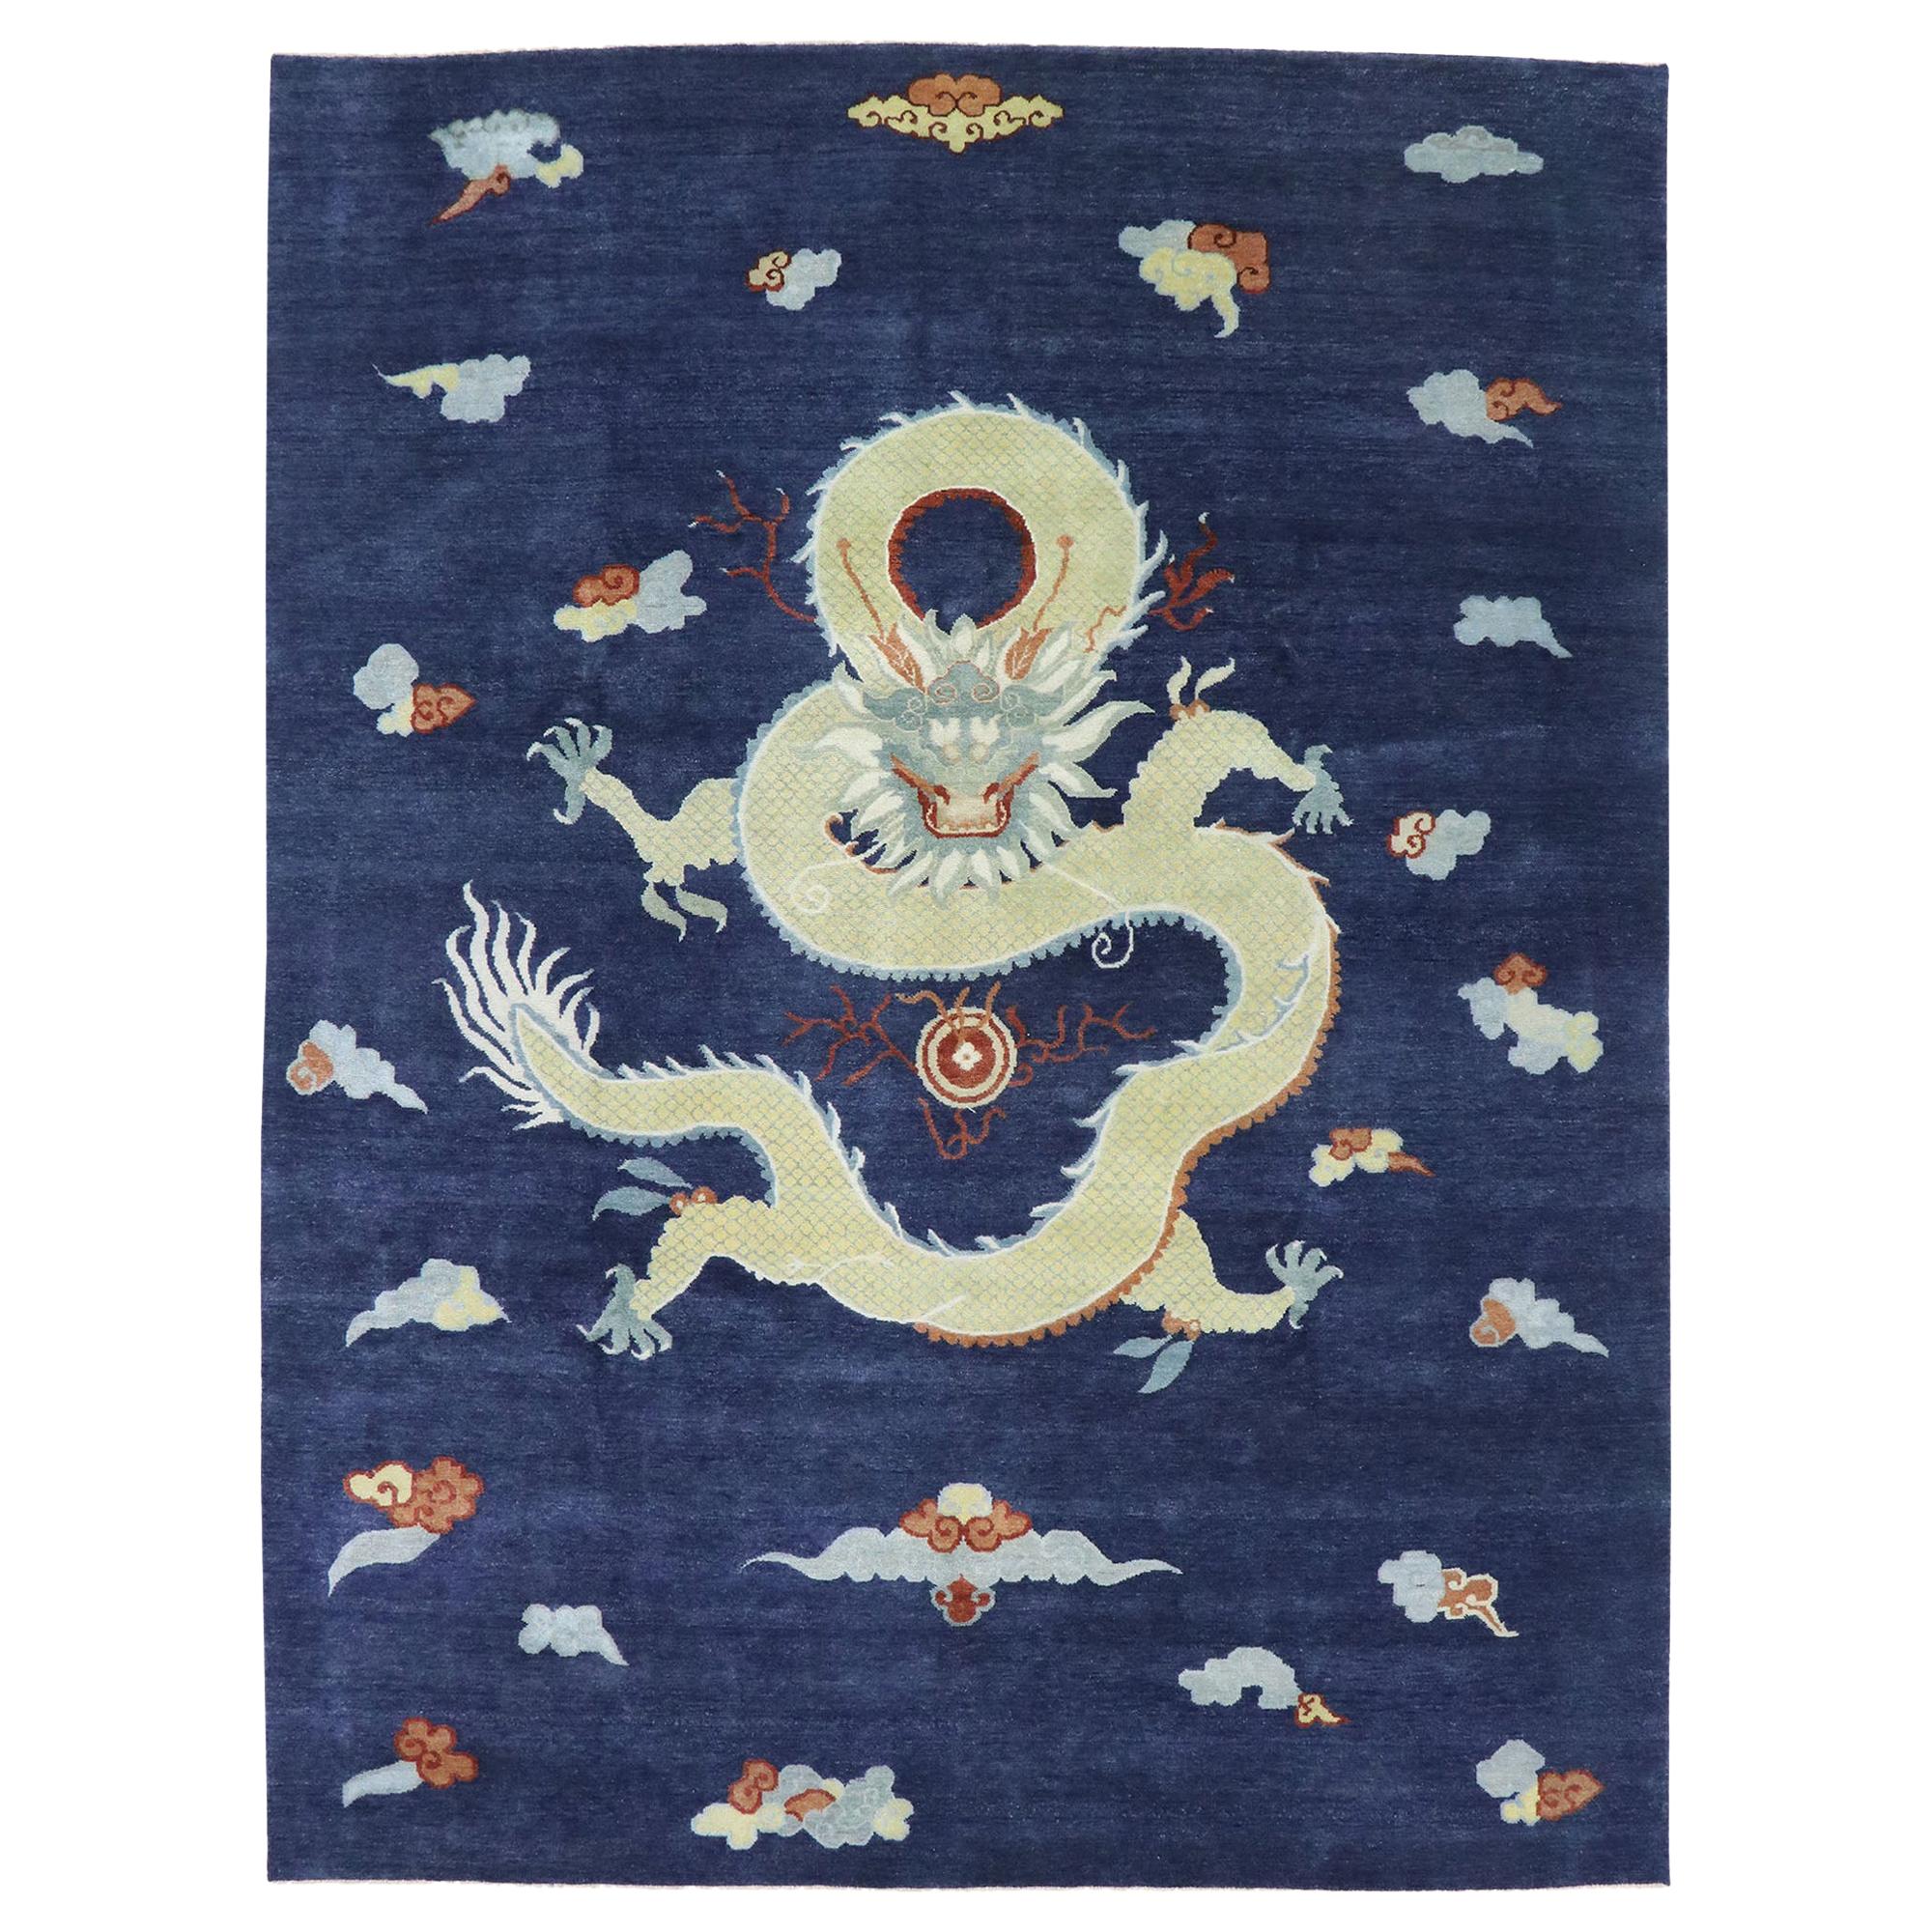 New Contemporary Chinese Art Deco Style Dragon Pictorial Rug